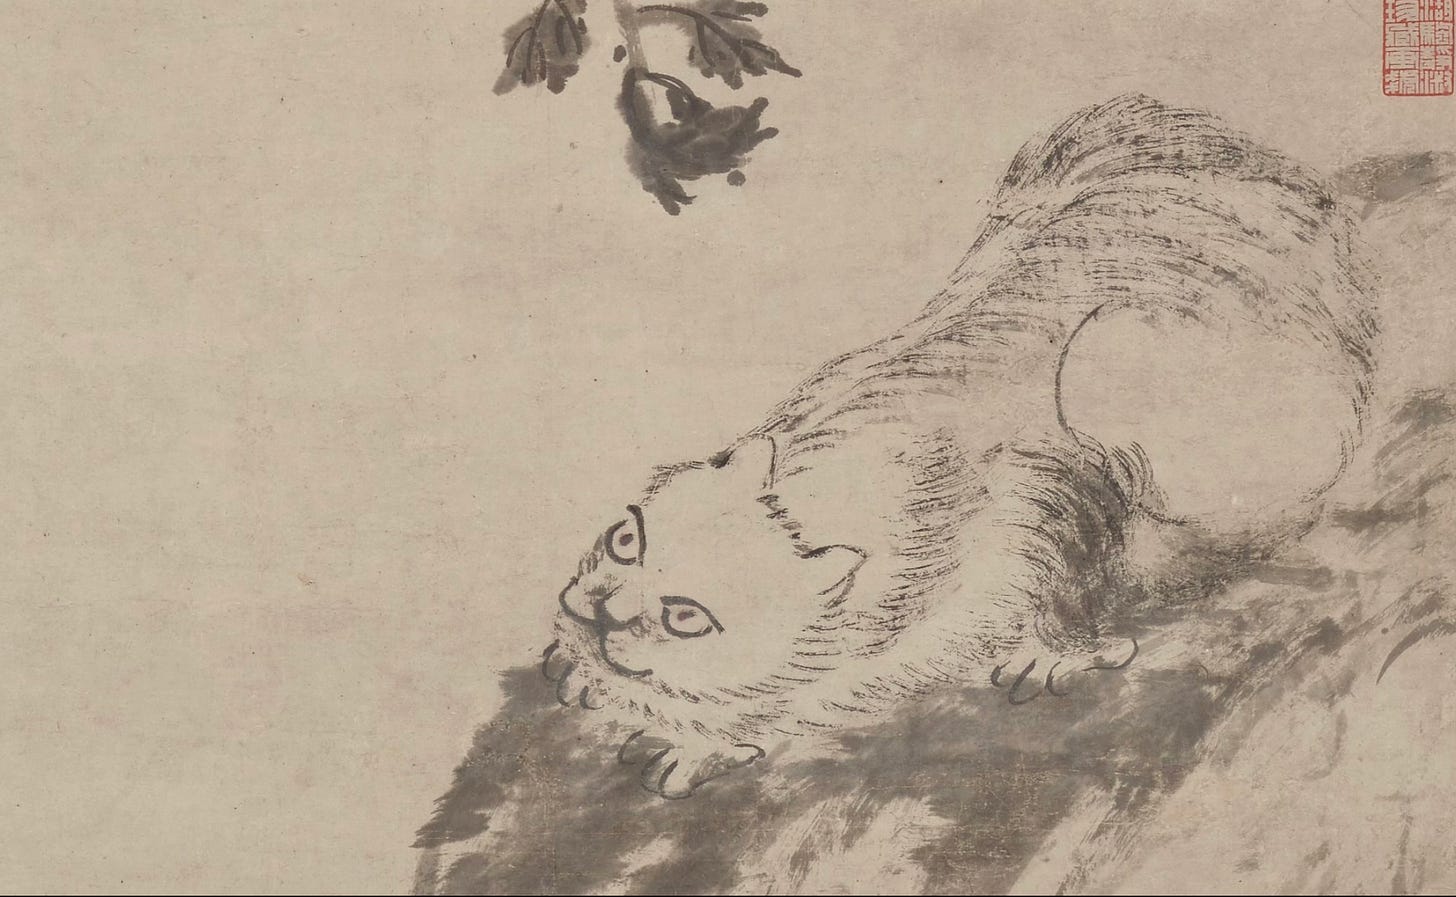 A close-up of the eponymous crouching cat, which is done in such a simple, almost naive style that you aren't ready for how fierce its eyes are.